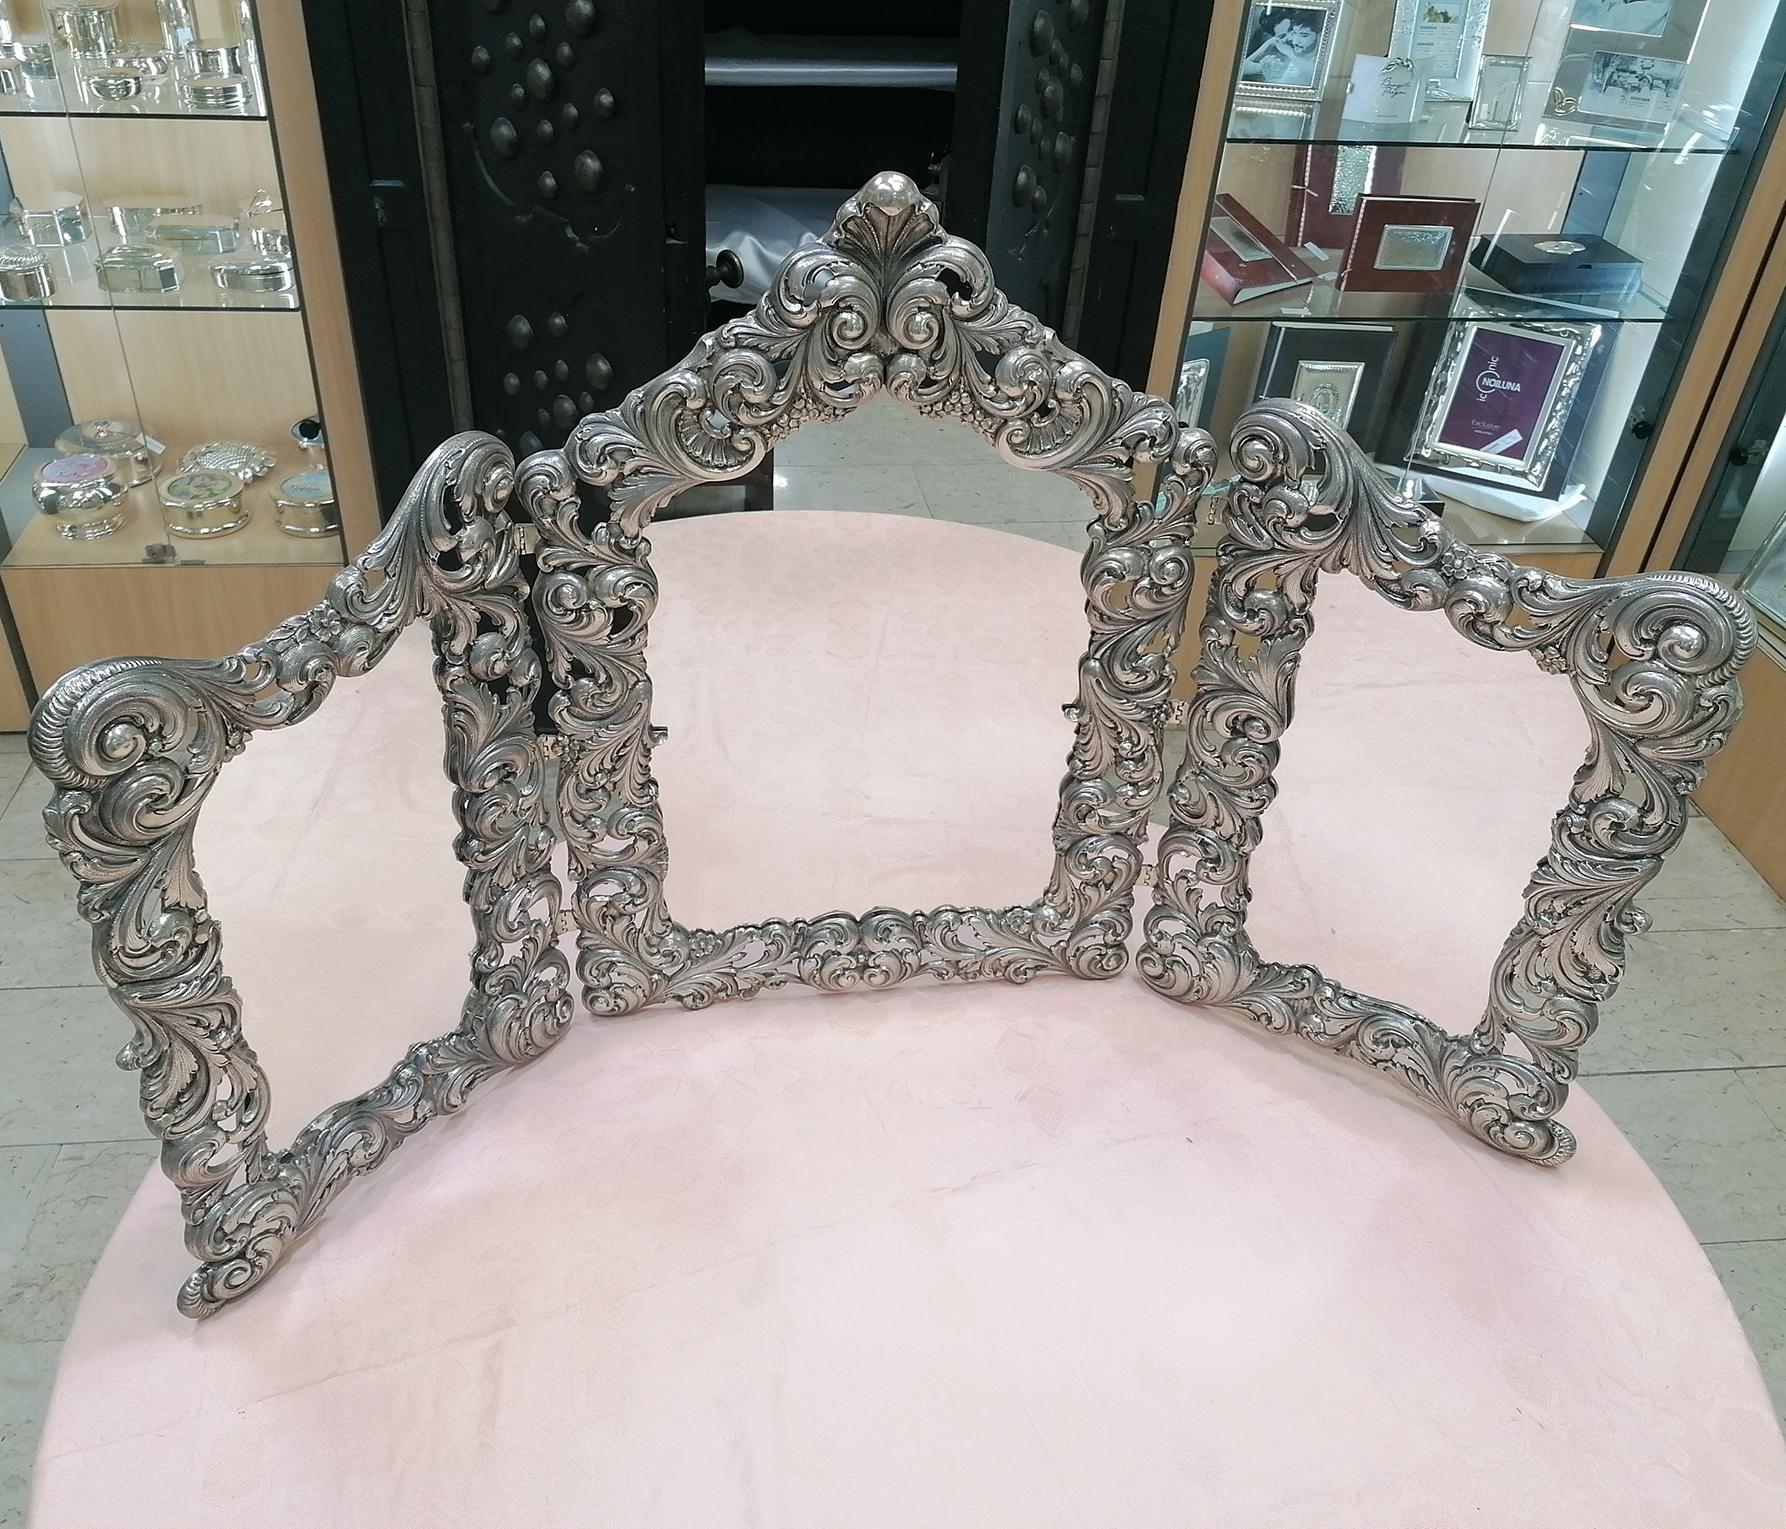 This Italian Baroque style Sterling Silver mirror is fully hand embossed and chiselled on silver sheet by hand. The two side mirrors are attached by silver hinges. 
4.600 grams.

Italian silverware, already with a centuries-old tradition, had a